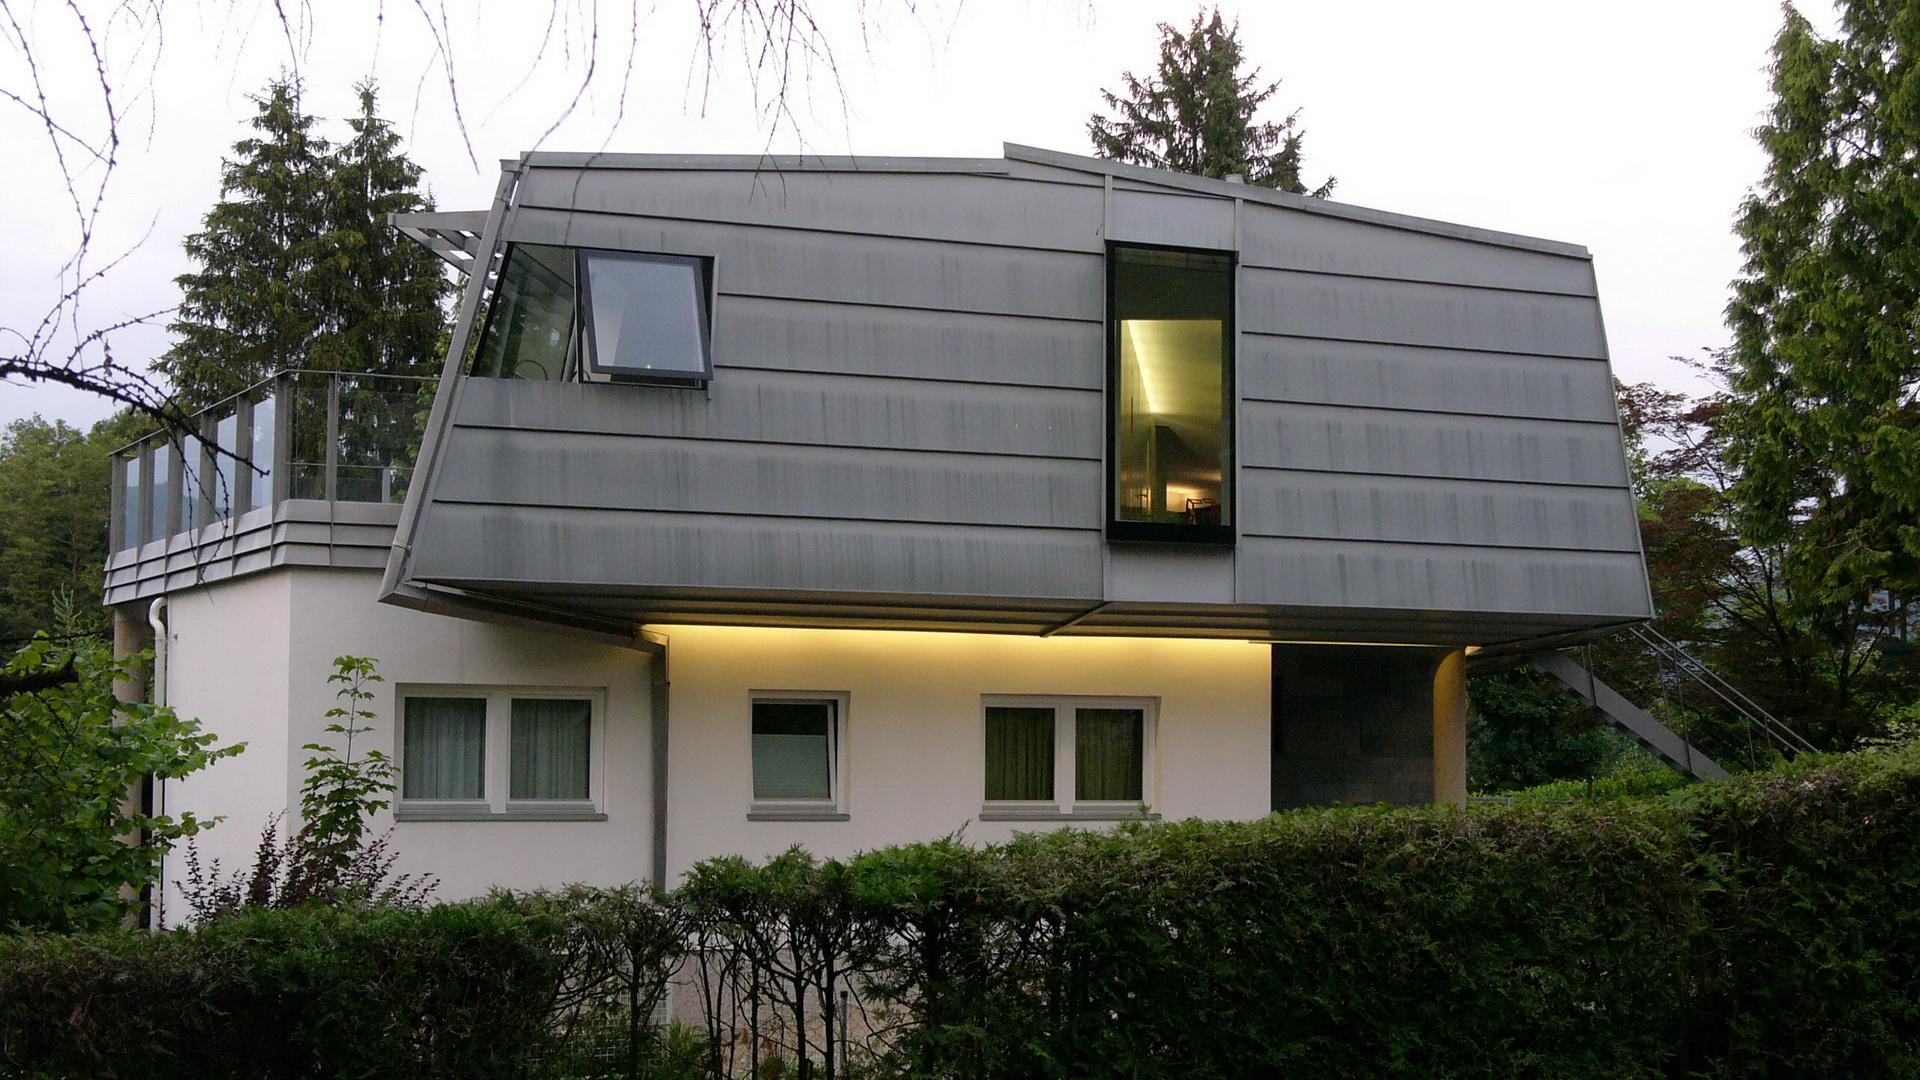 OHA - M MONDSEE II 03 - Office For Heuristic Architecture